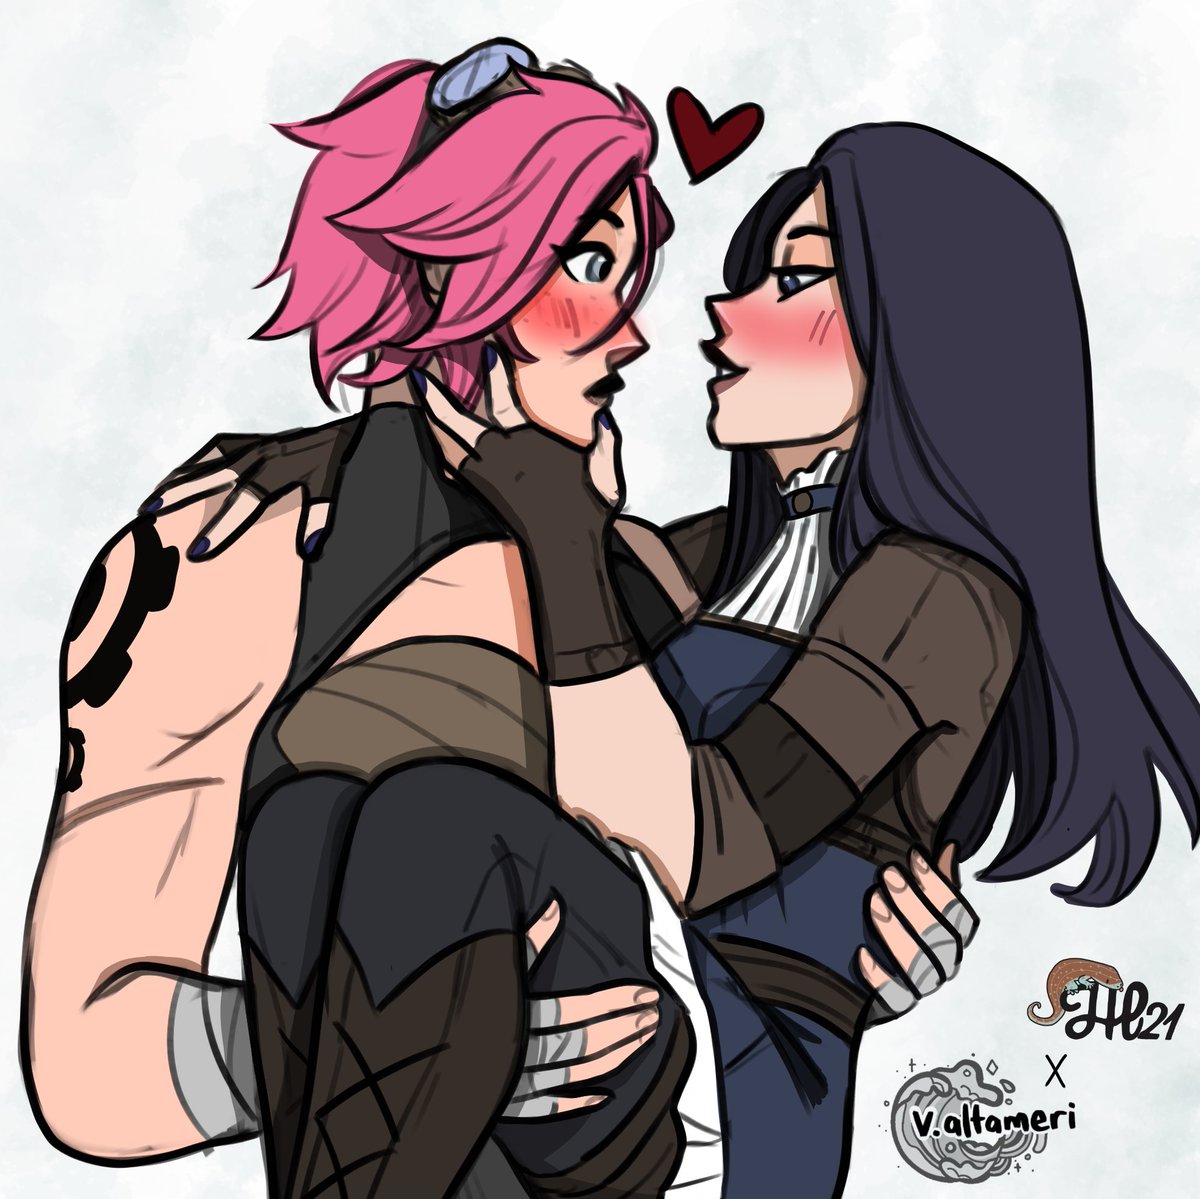 collab with @happylizard21 for #piltoversfinestmonth :)))
i did the line art and they colored it in!!! LOOK HOW AMAZING THE COLORS ARE ISTG

if they dont kiss in act 3 then haha im :) gonna lose my shit

#ARCANE #ArcaneArt #vicait #vi #caitlyn #piltoversfinest #leagueoflesbians